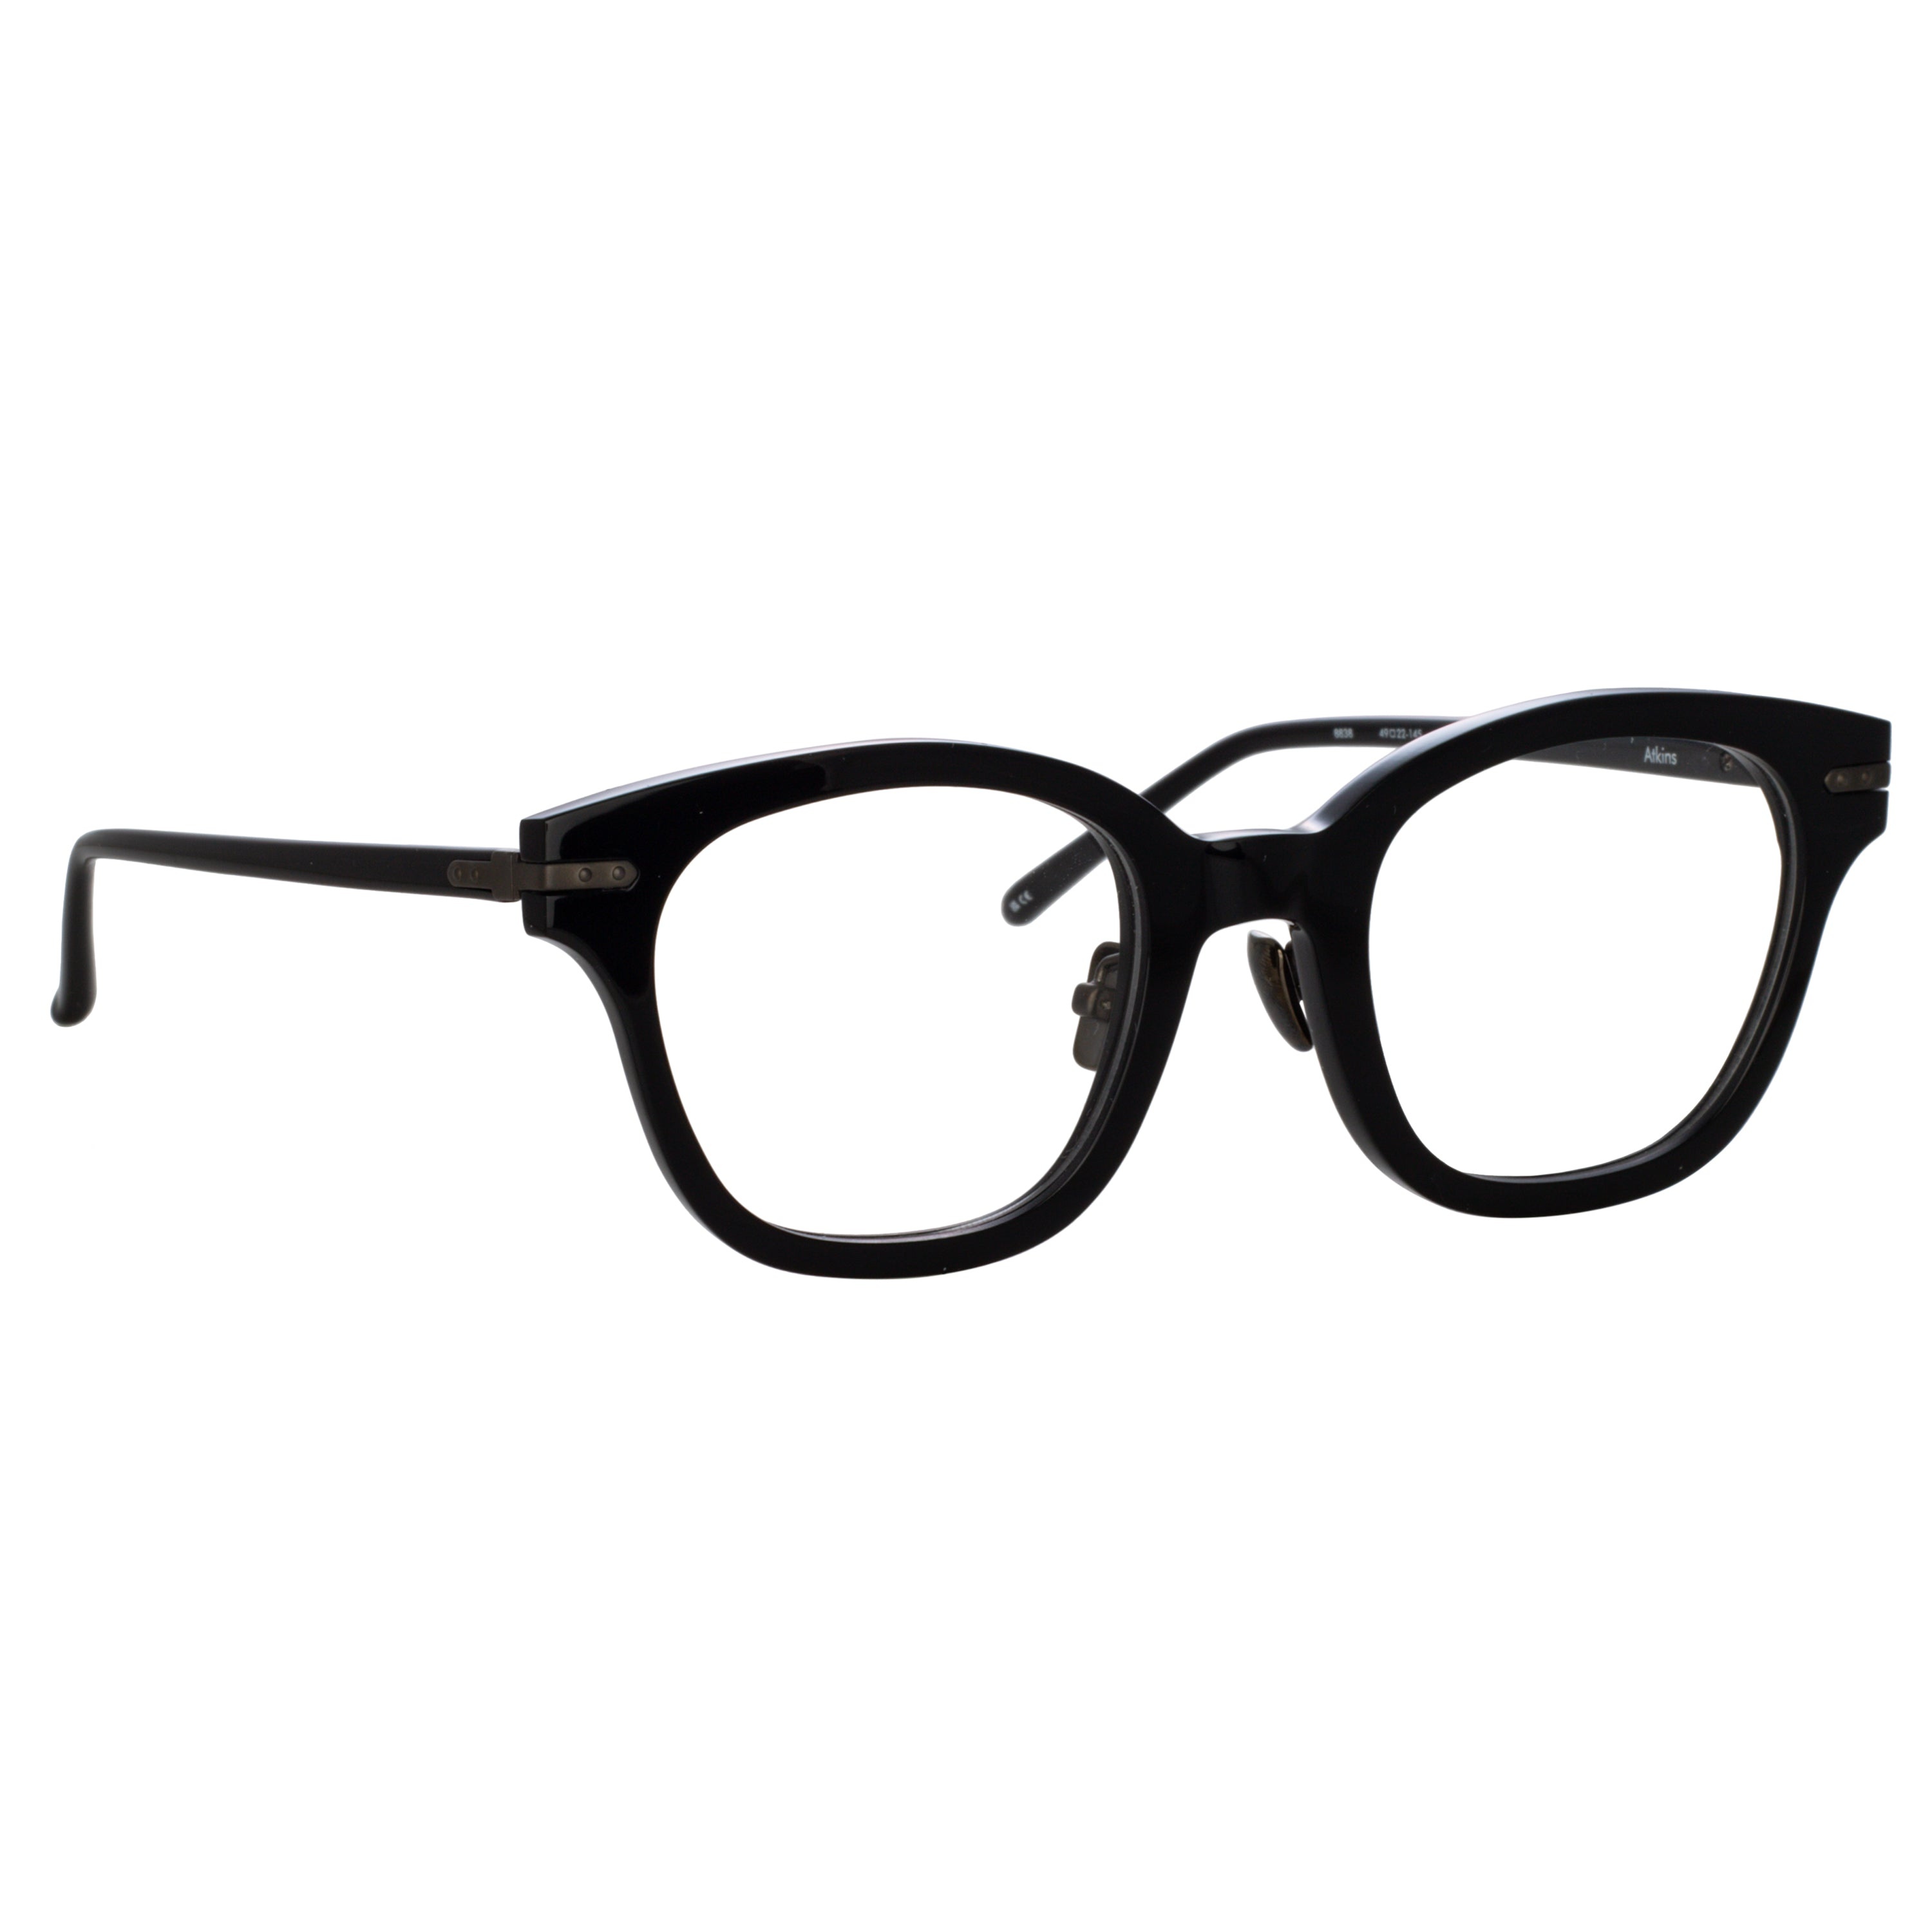 ATKINS A OPTICAL D-FRAME IN BLACK (ASIAN FIT) - 3